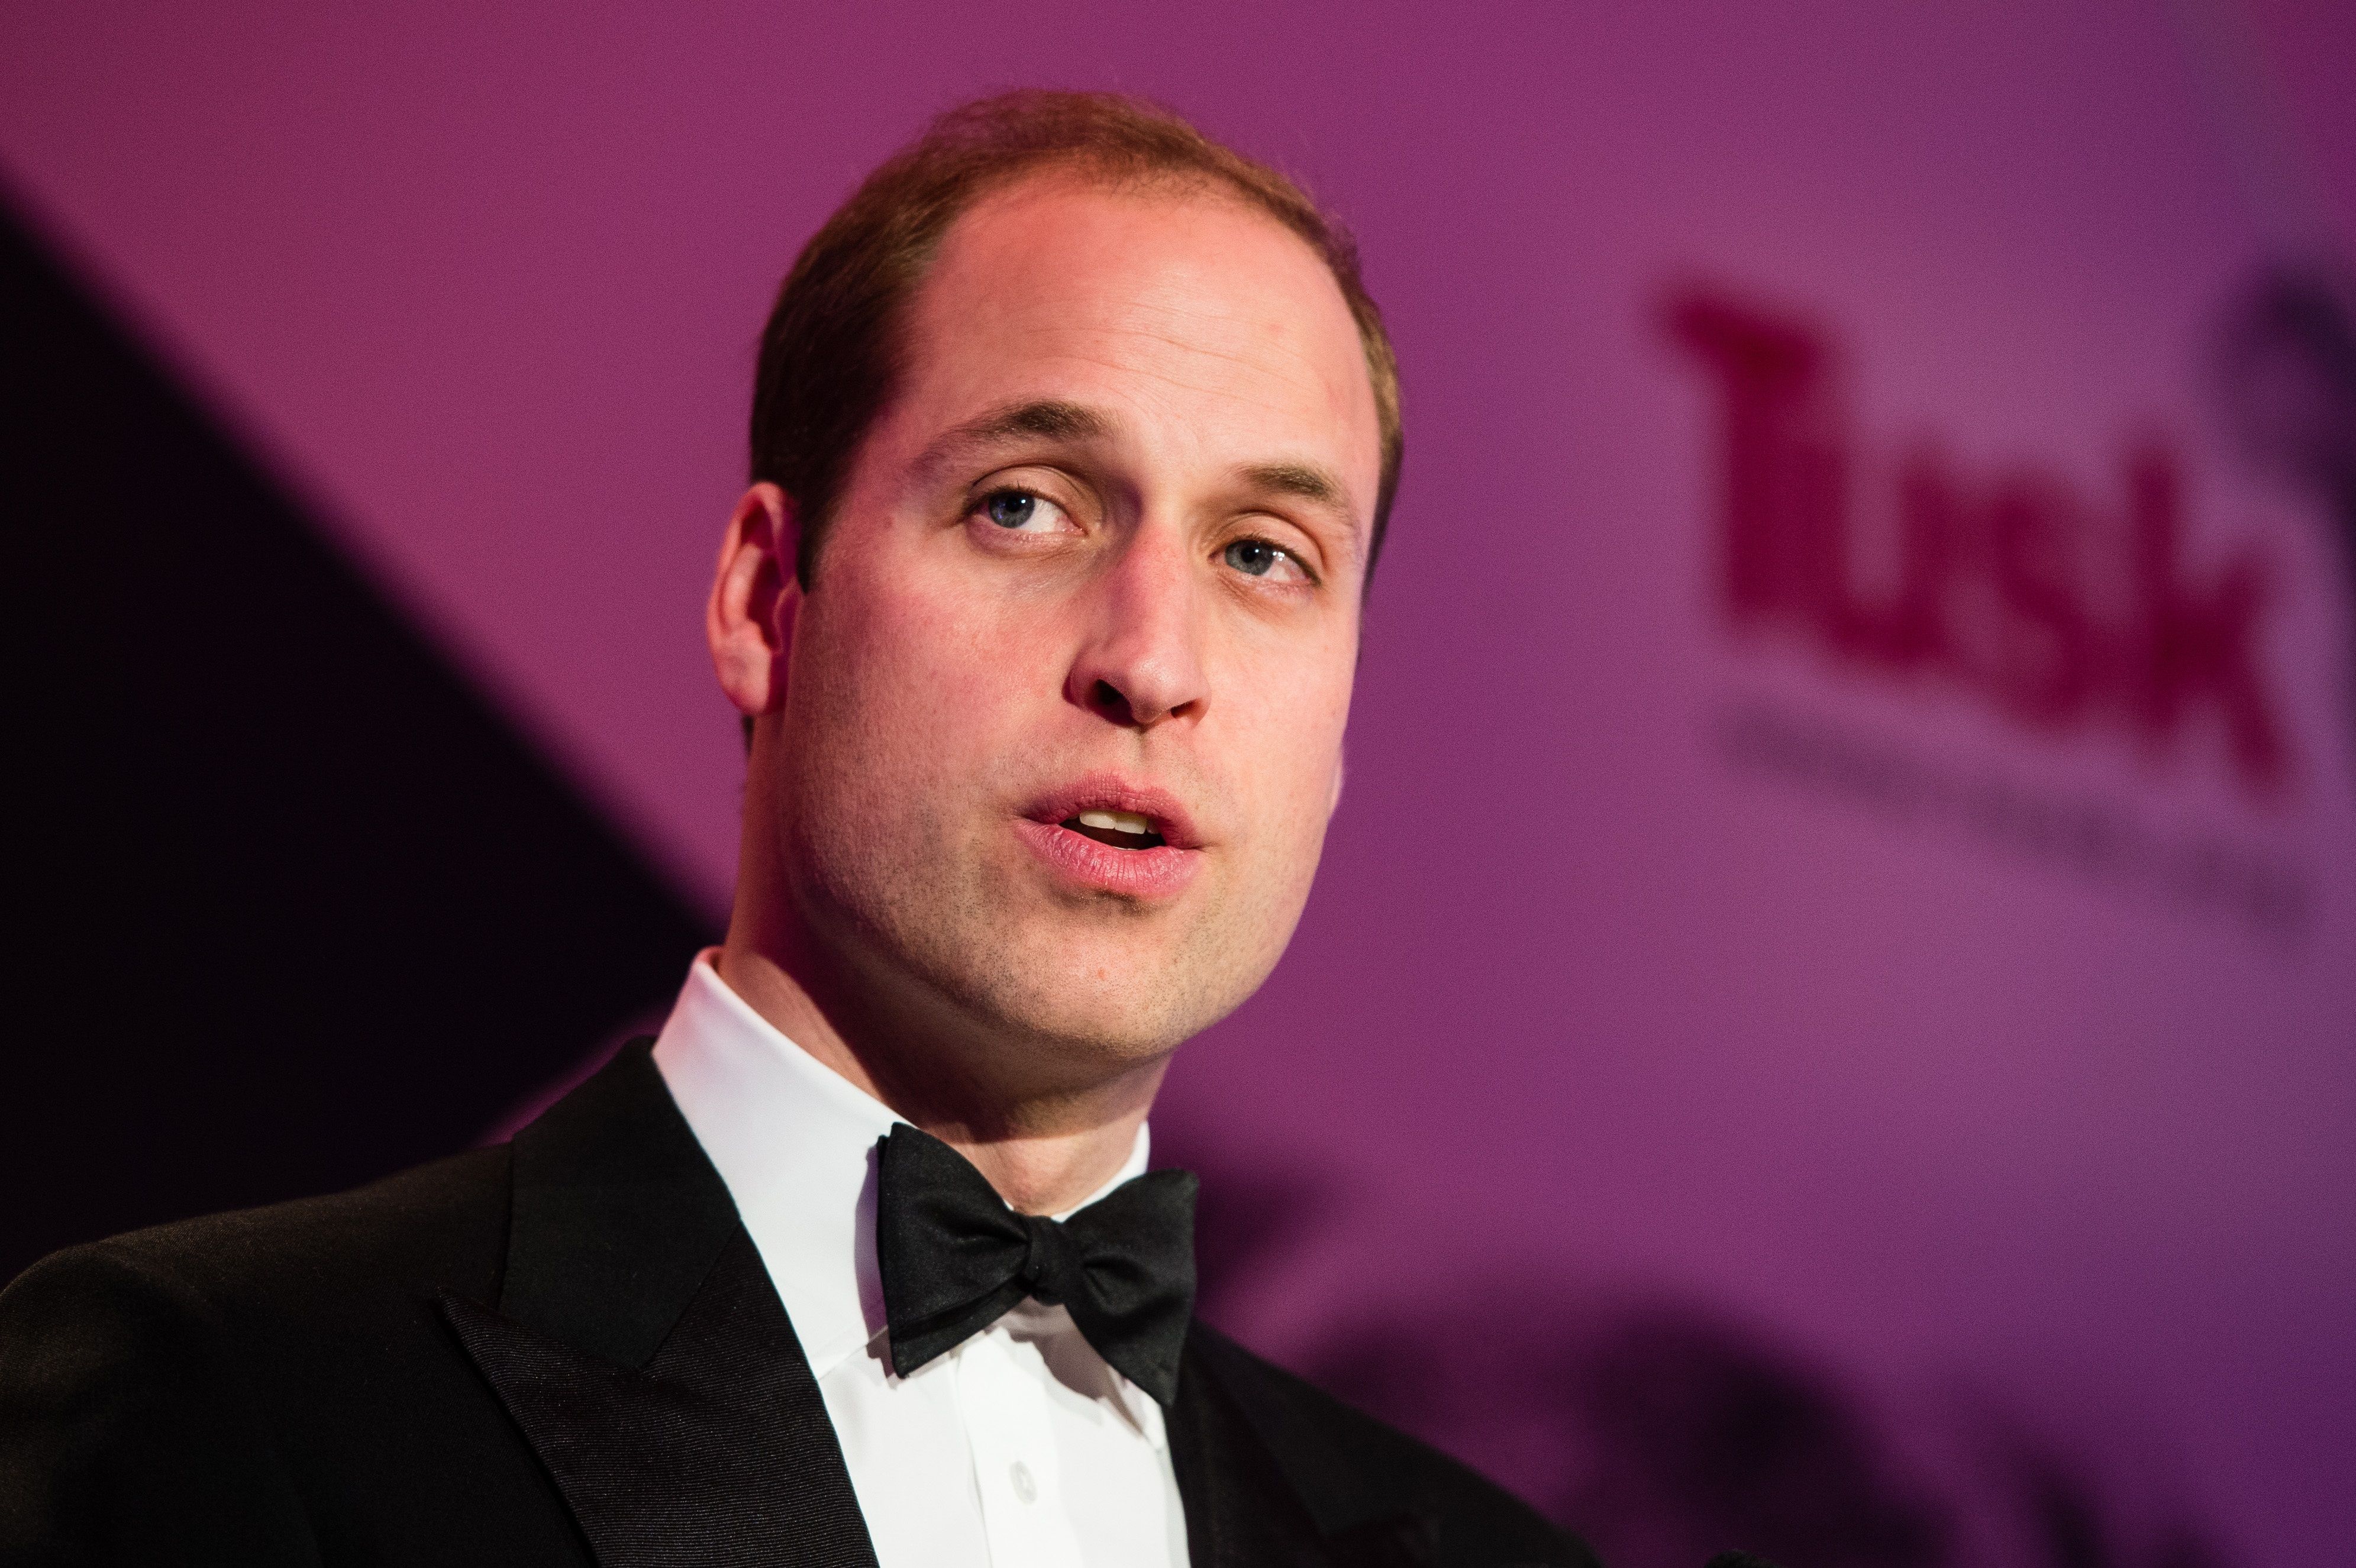 Prince William Wallpaper Image Photo Picture Background